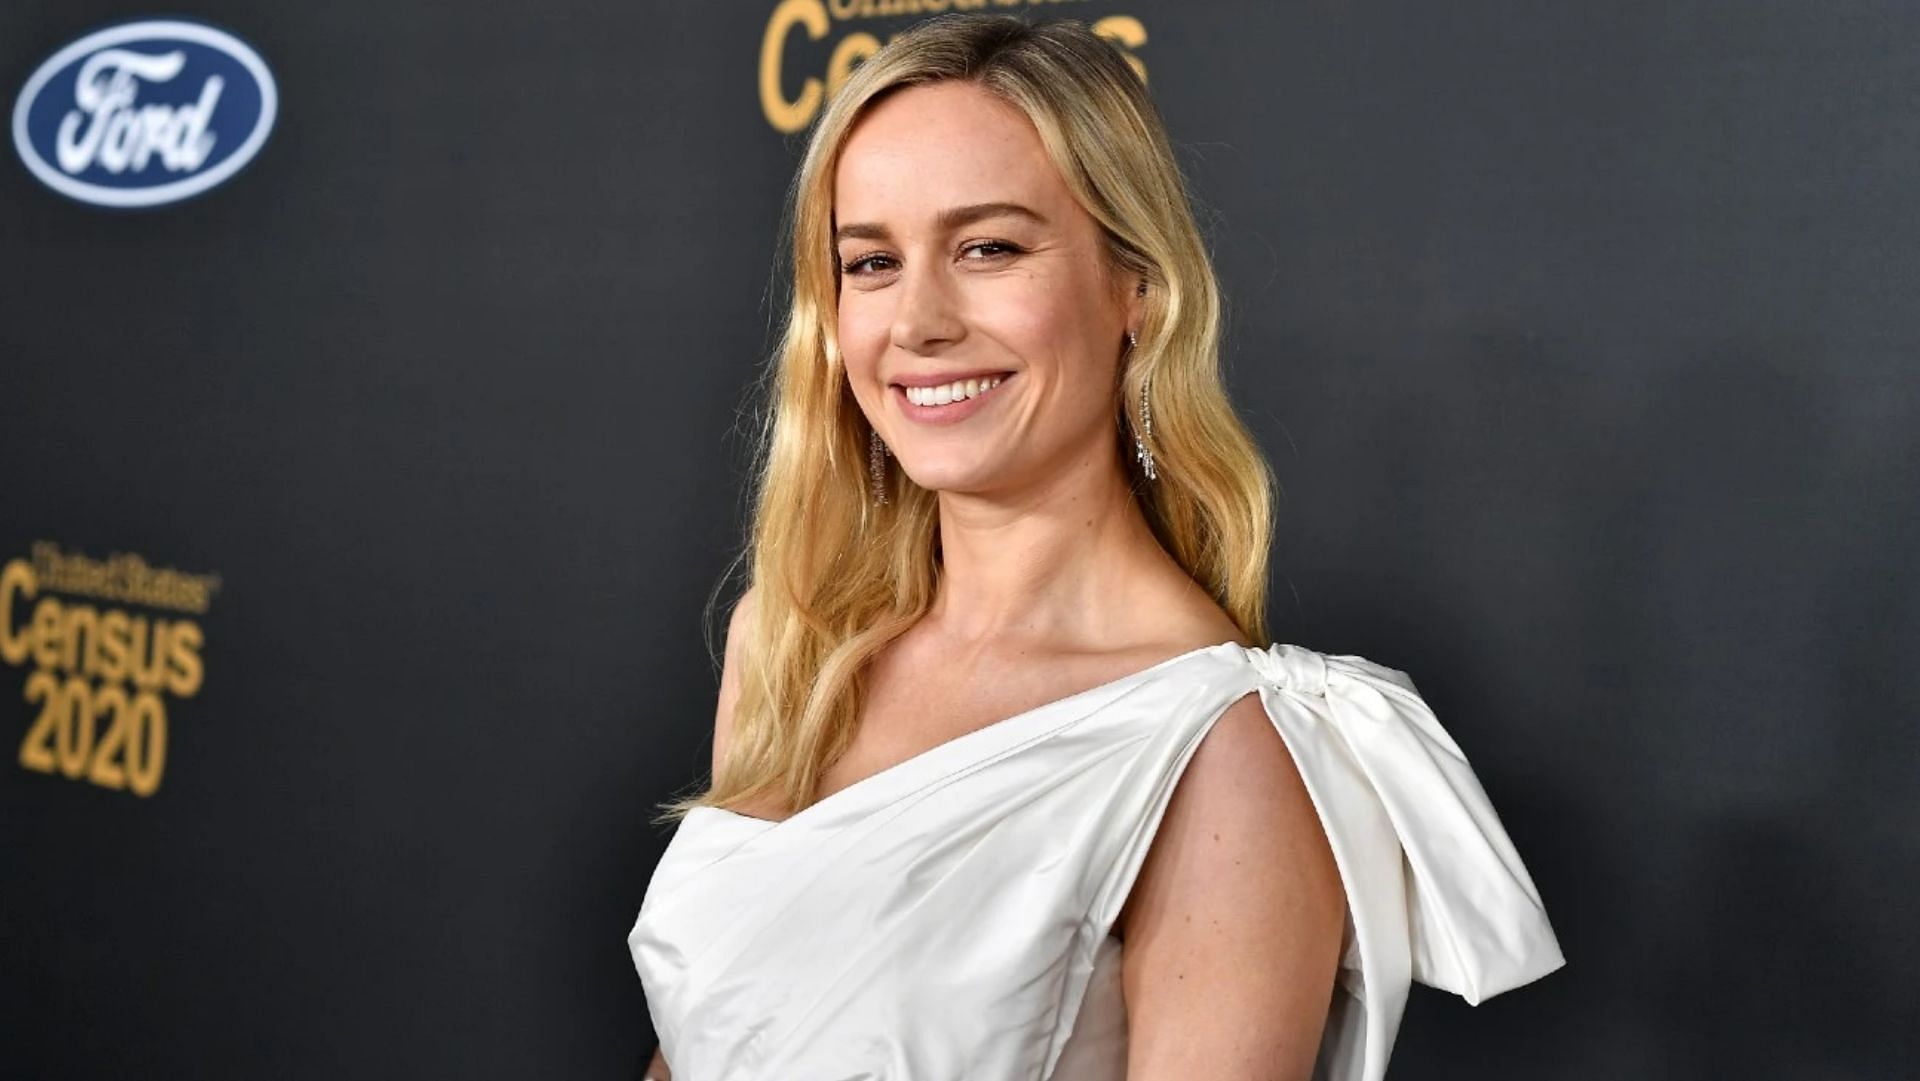 Brie Larson plays the role of Captain Marvel in the Marvel Cinematic Universe. (Image via Paras Griffin/Getty Images)